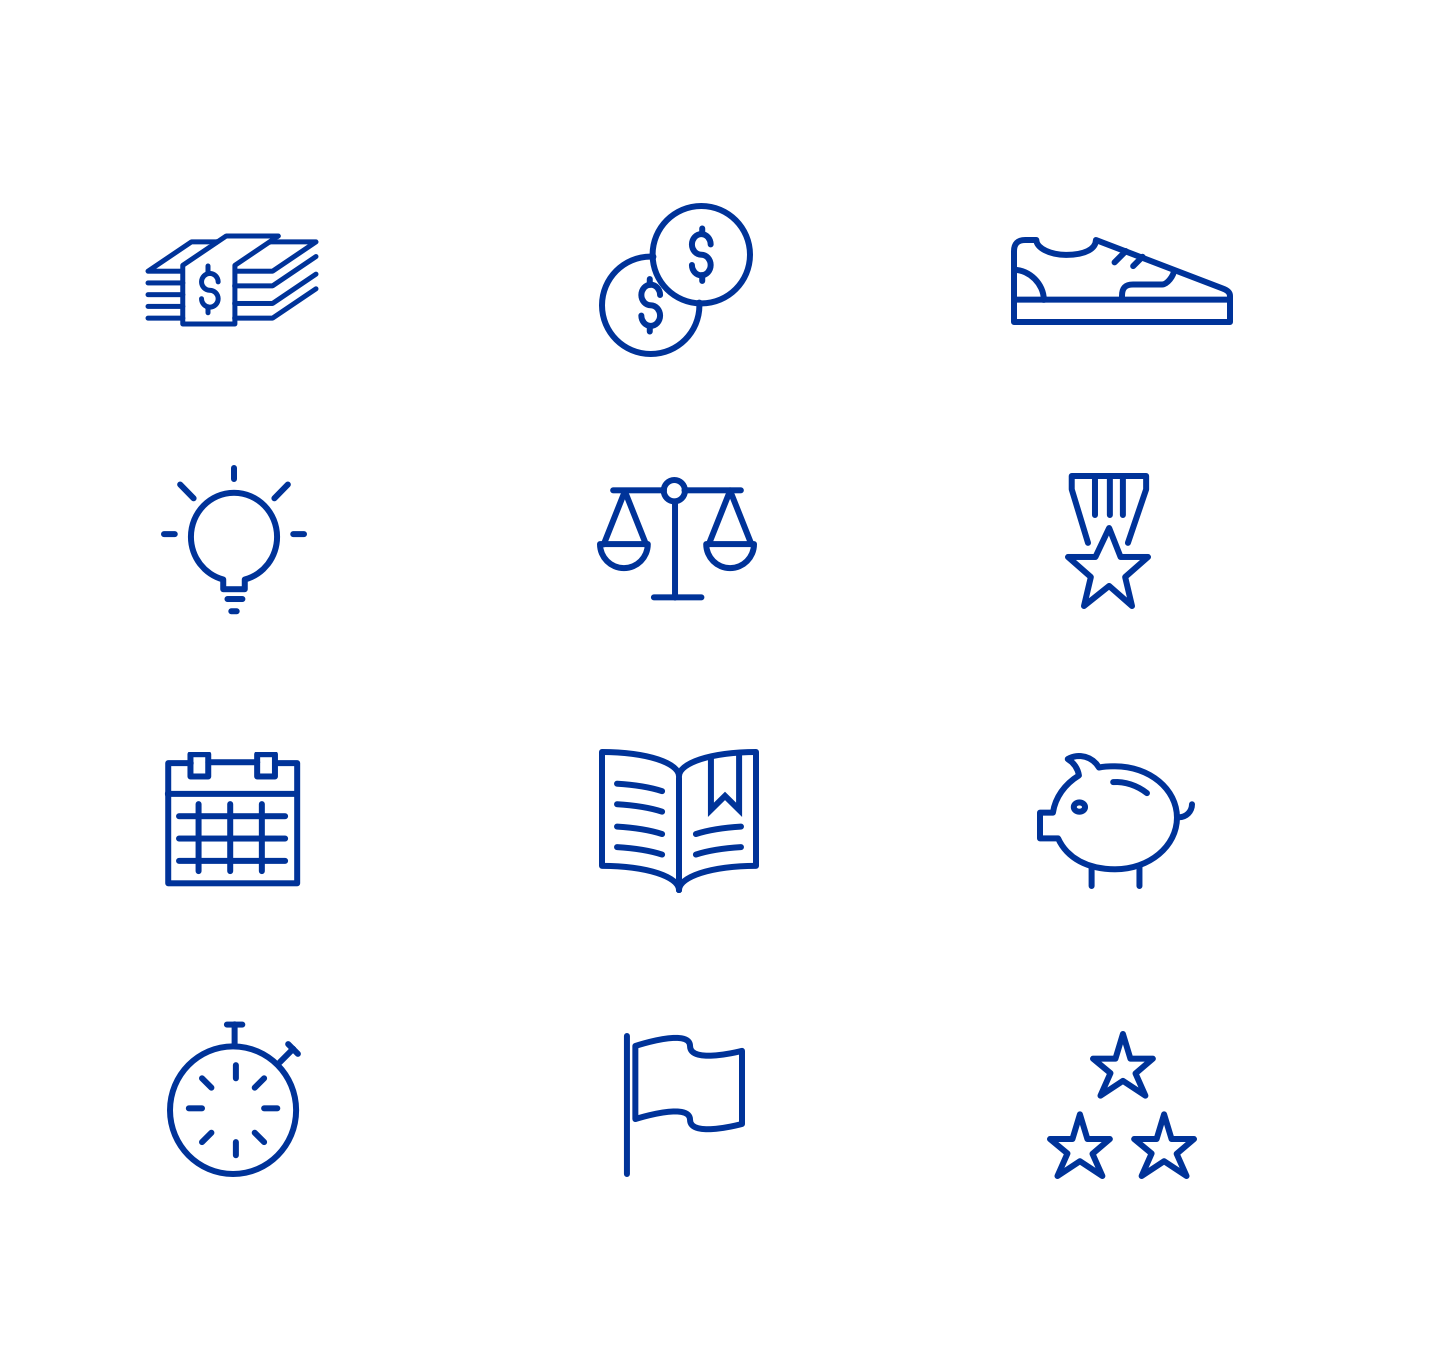 Icons from the National Cart Co. website design to illustrate product features